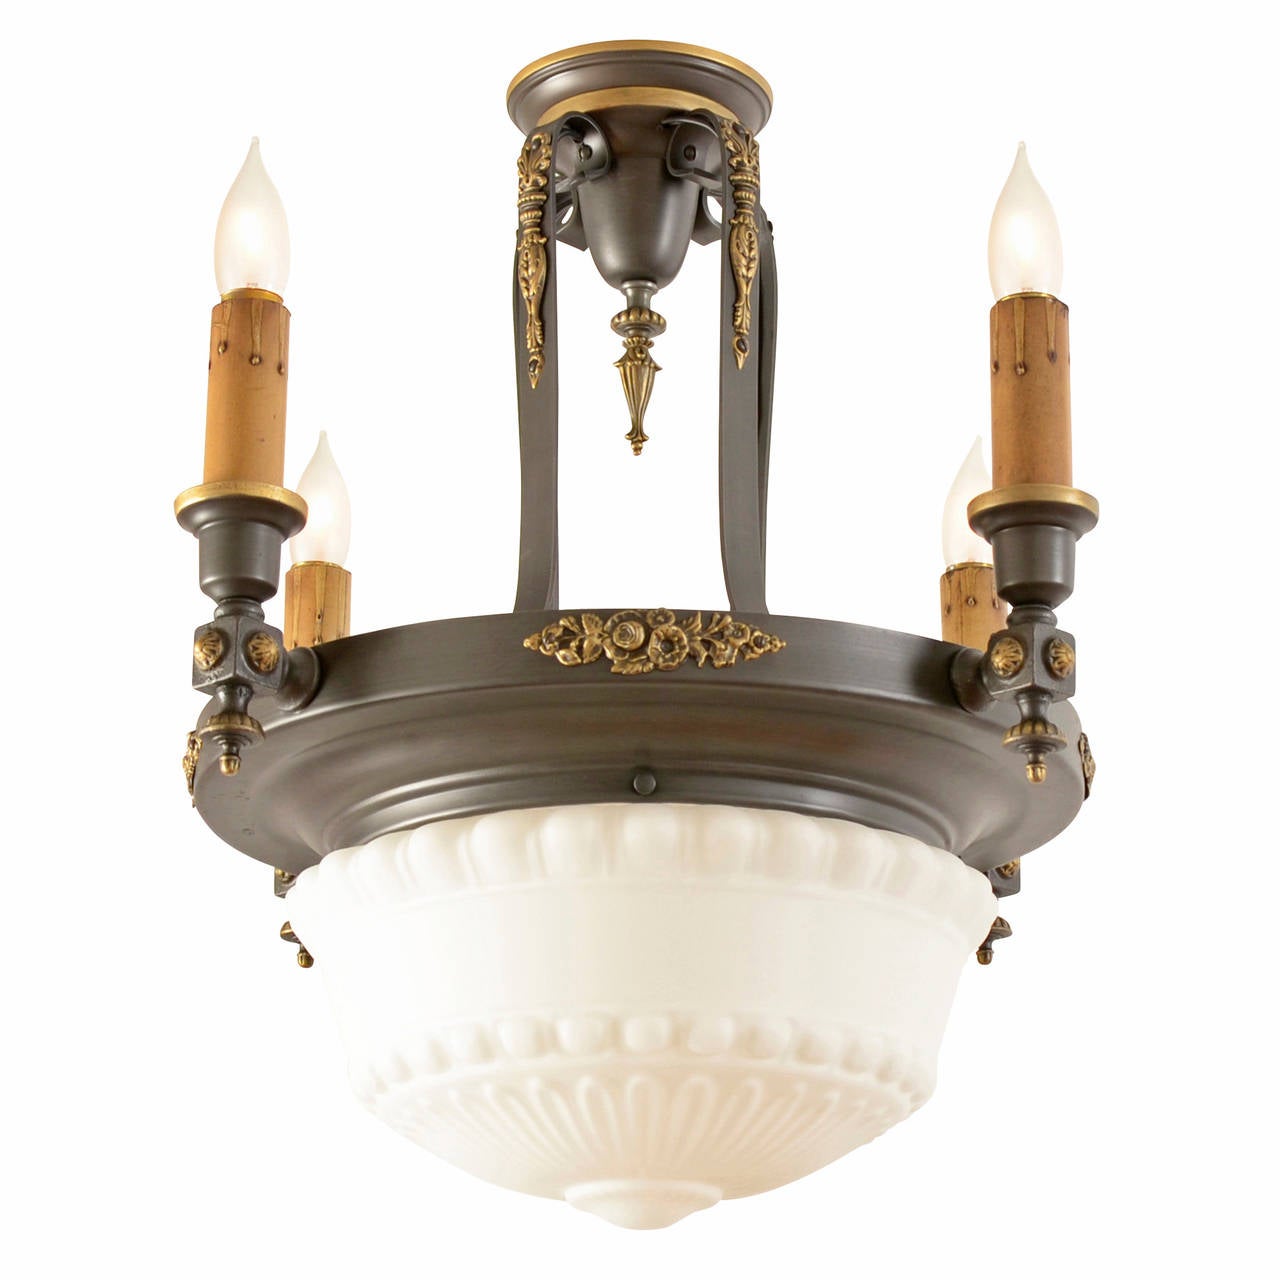 Combining the two hottest lighting trends of its time - bowl shades and multiple lights - this beautiful chandelier would have been a very special choice for bungalow, foursquare, or Colonial Revival dining rooms between 1915 and 1930. The most